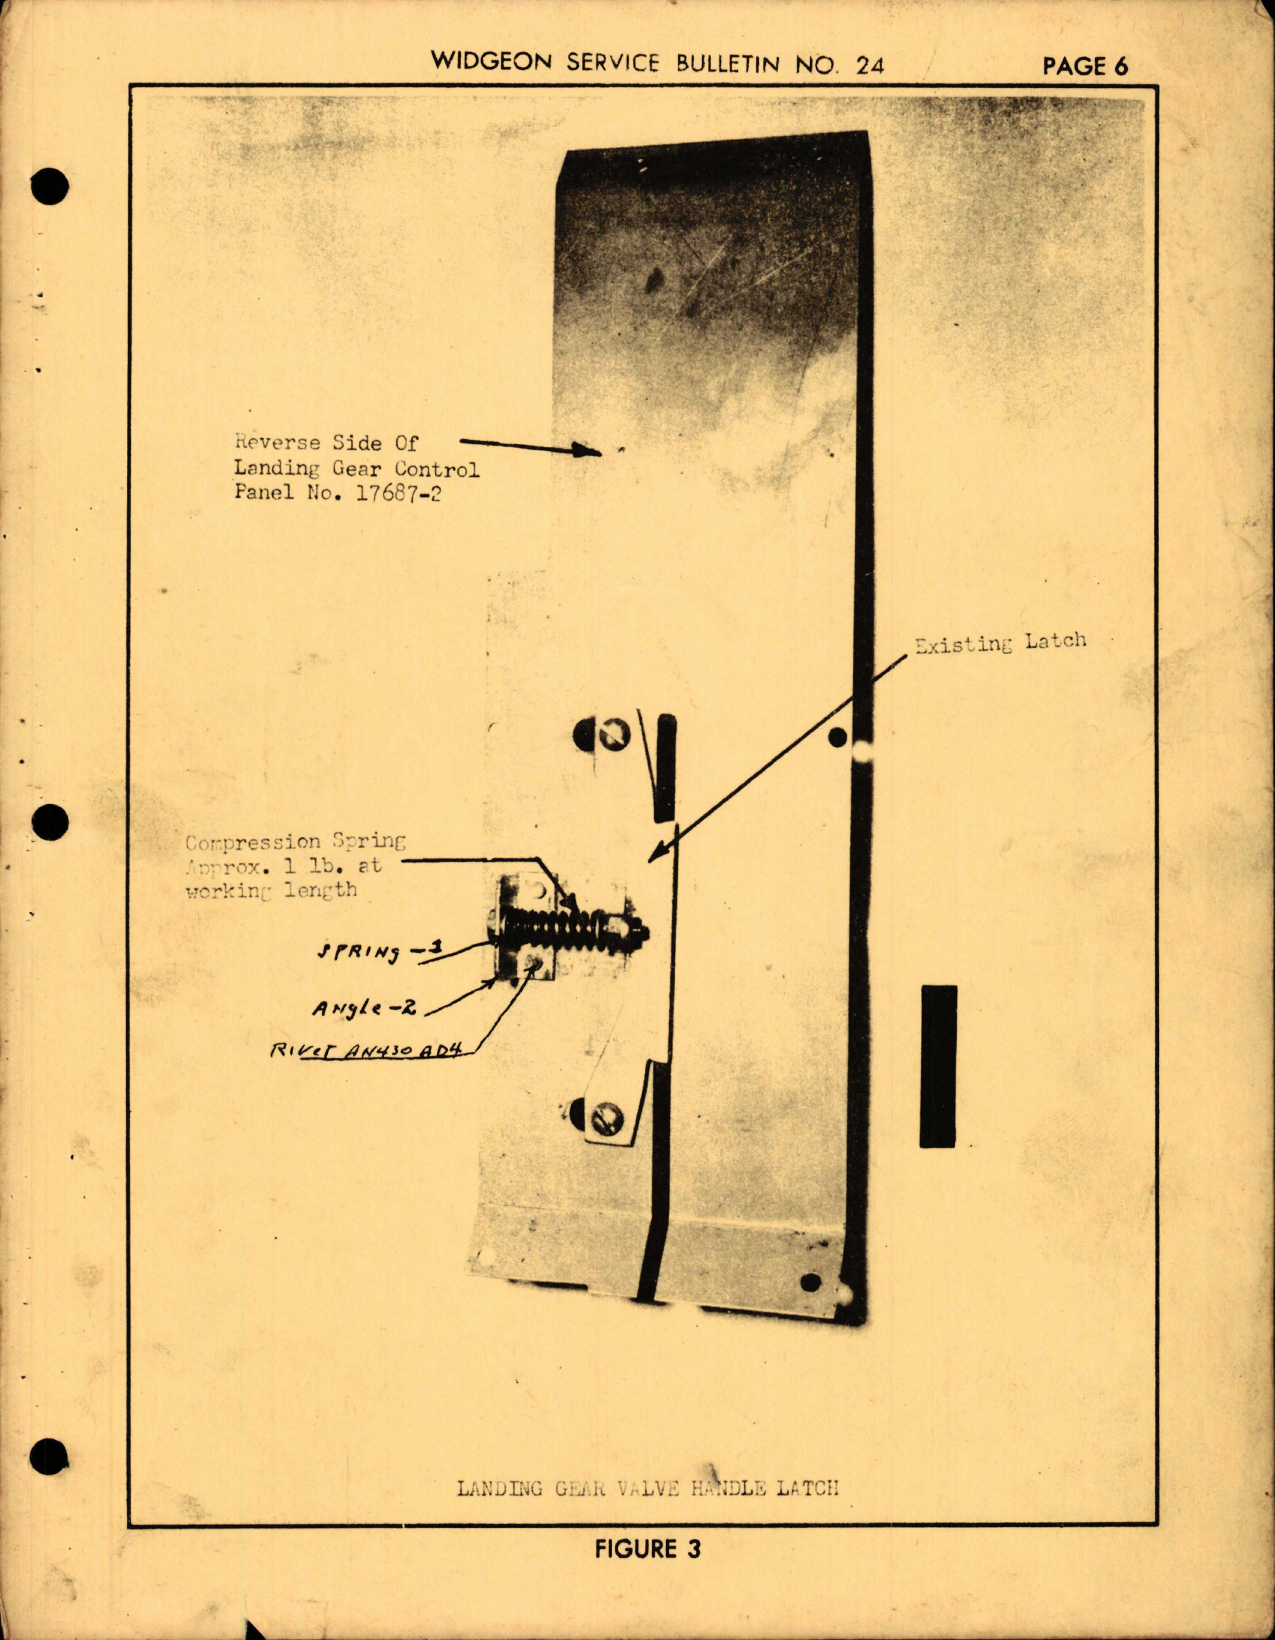 Sample page 5 from AirCorps Library document: Revision of Widgeon Hydraulic System